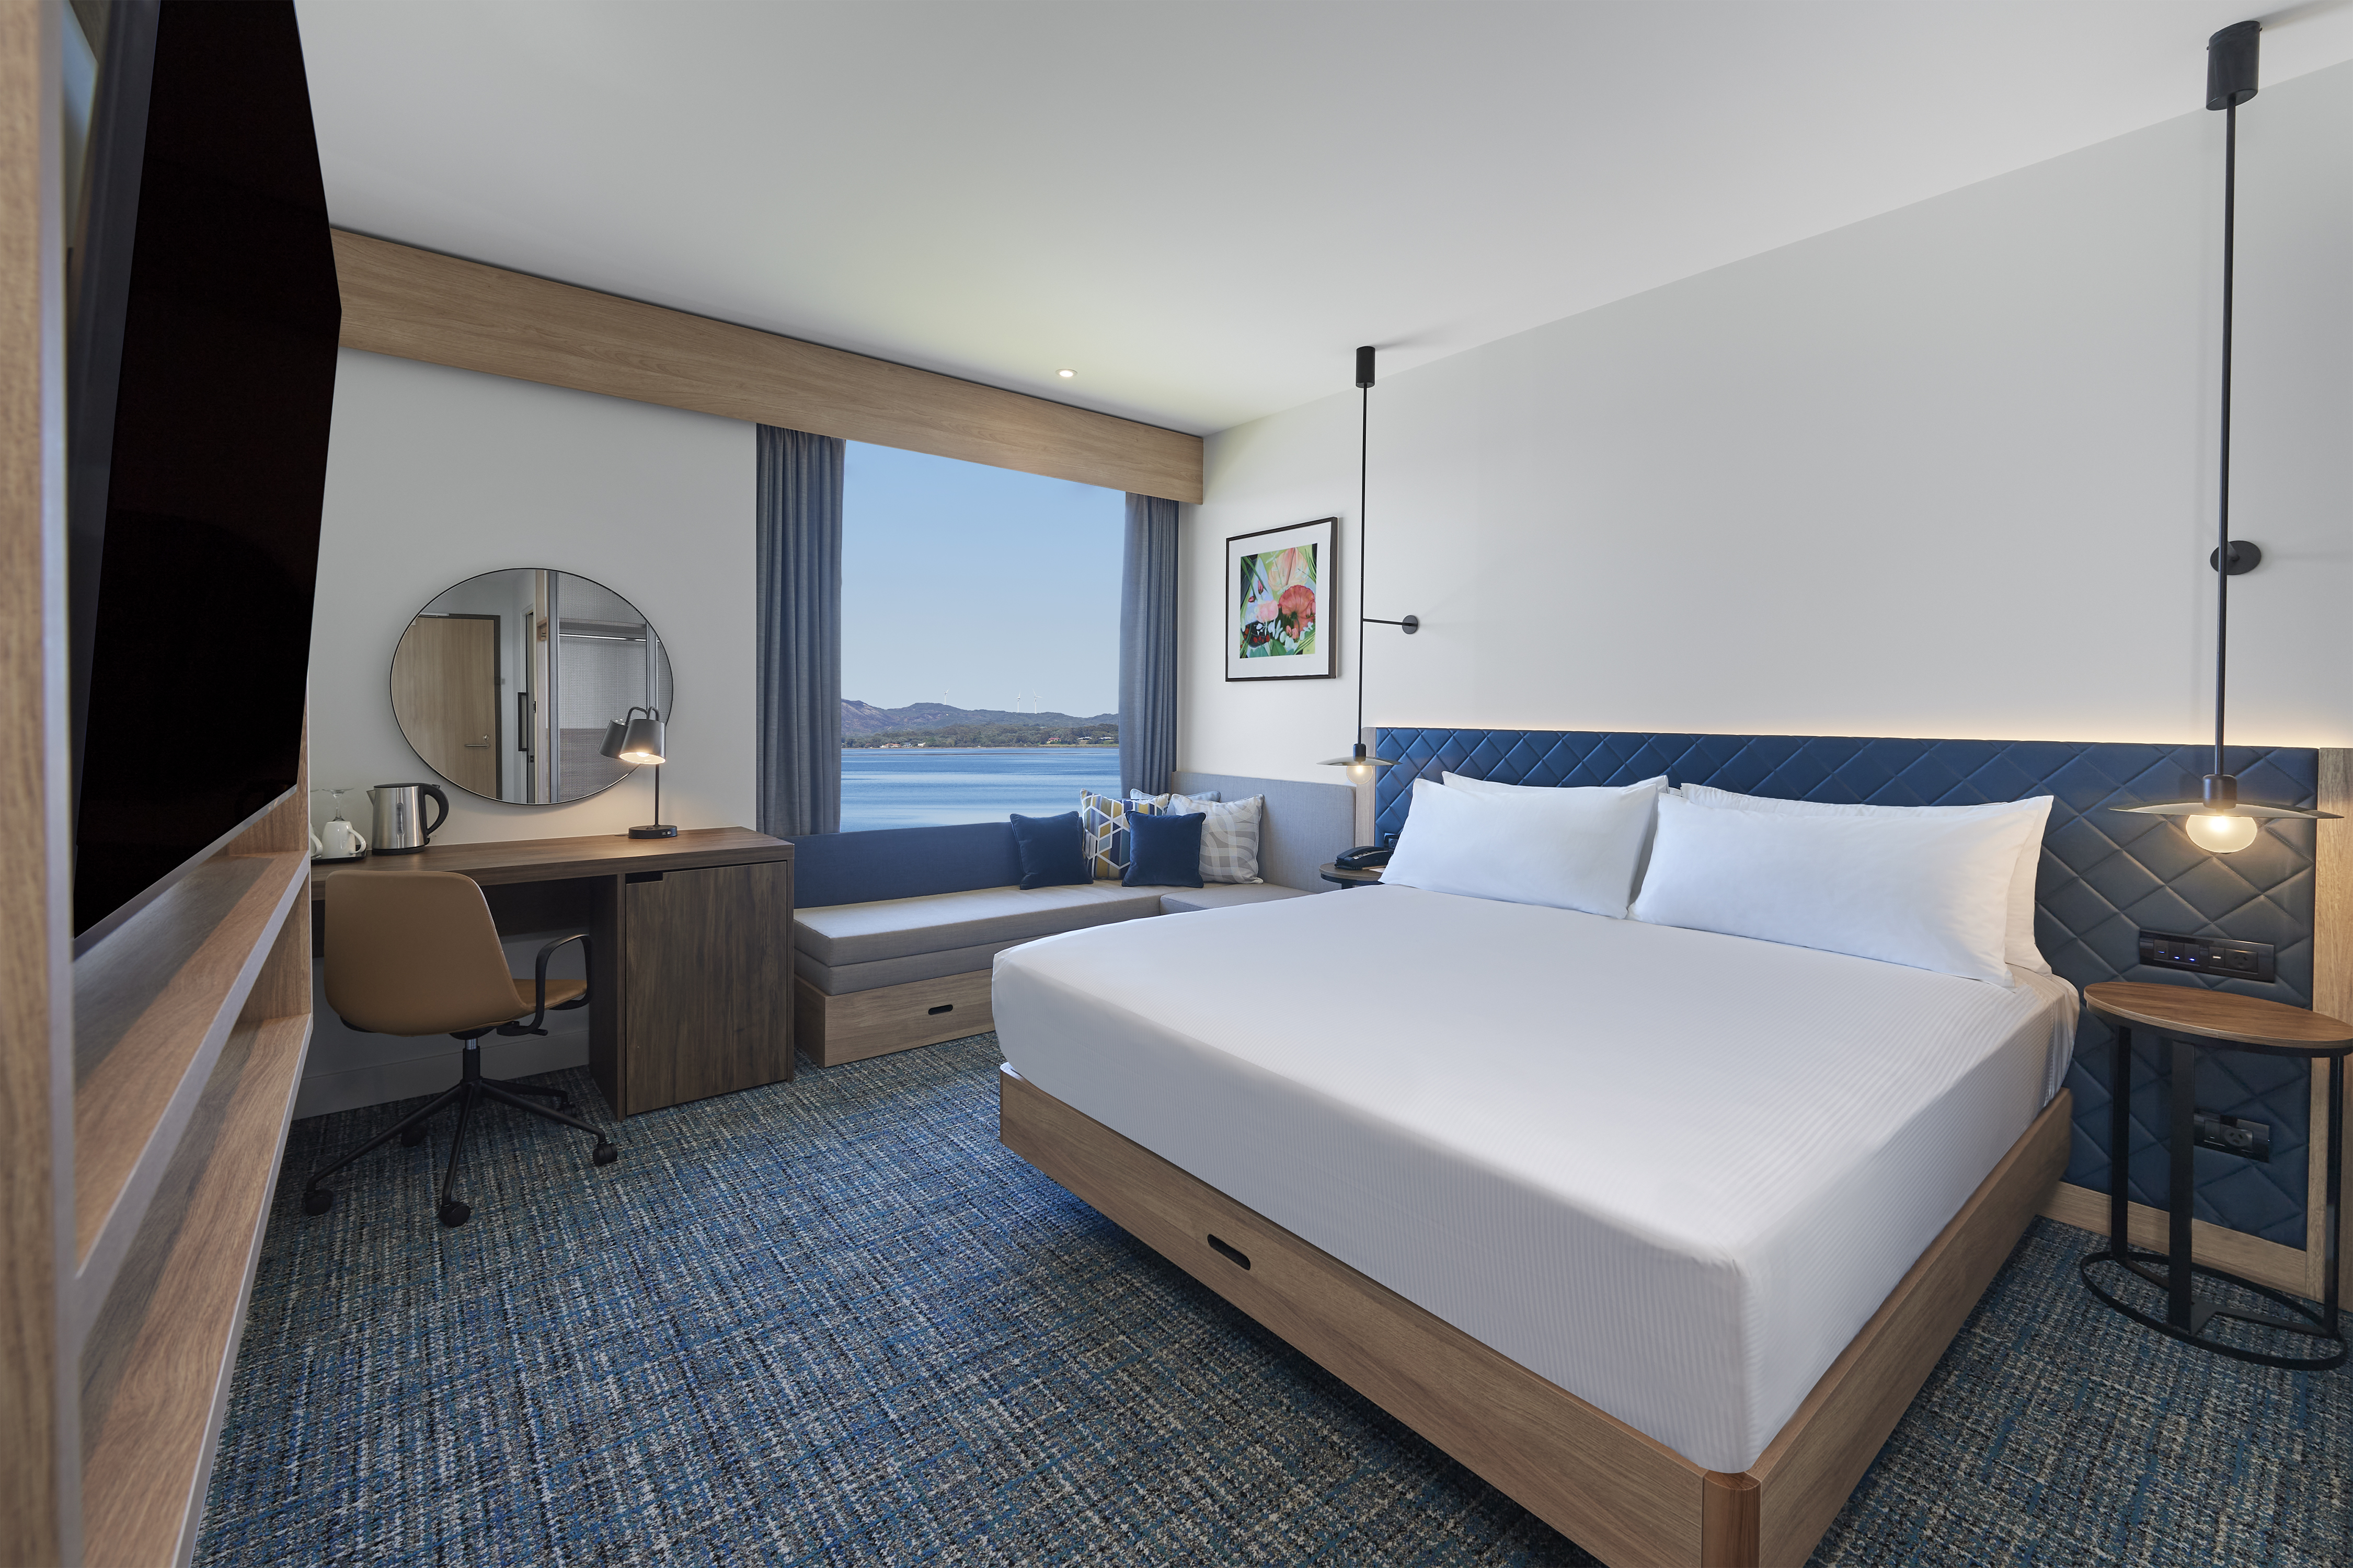 King Guest Room with Desk HDTV and Panoramic Ocean View